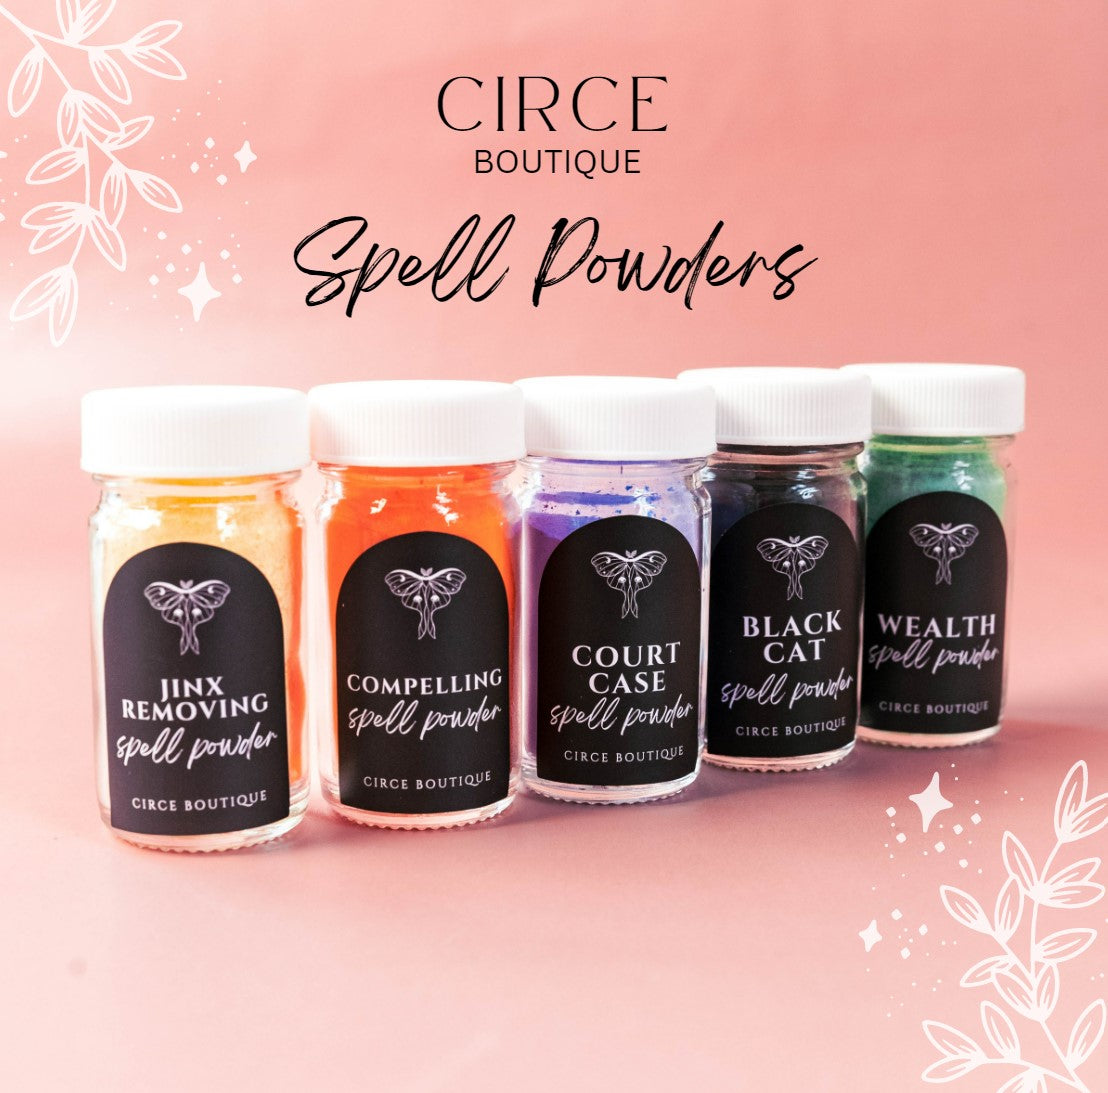 CIRCE Confusion Spell Powder 1.25 oz. - Spell Powder  from CirceBoutique